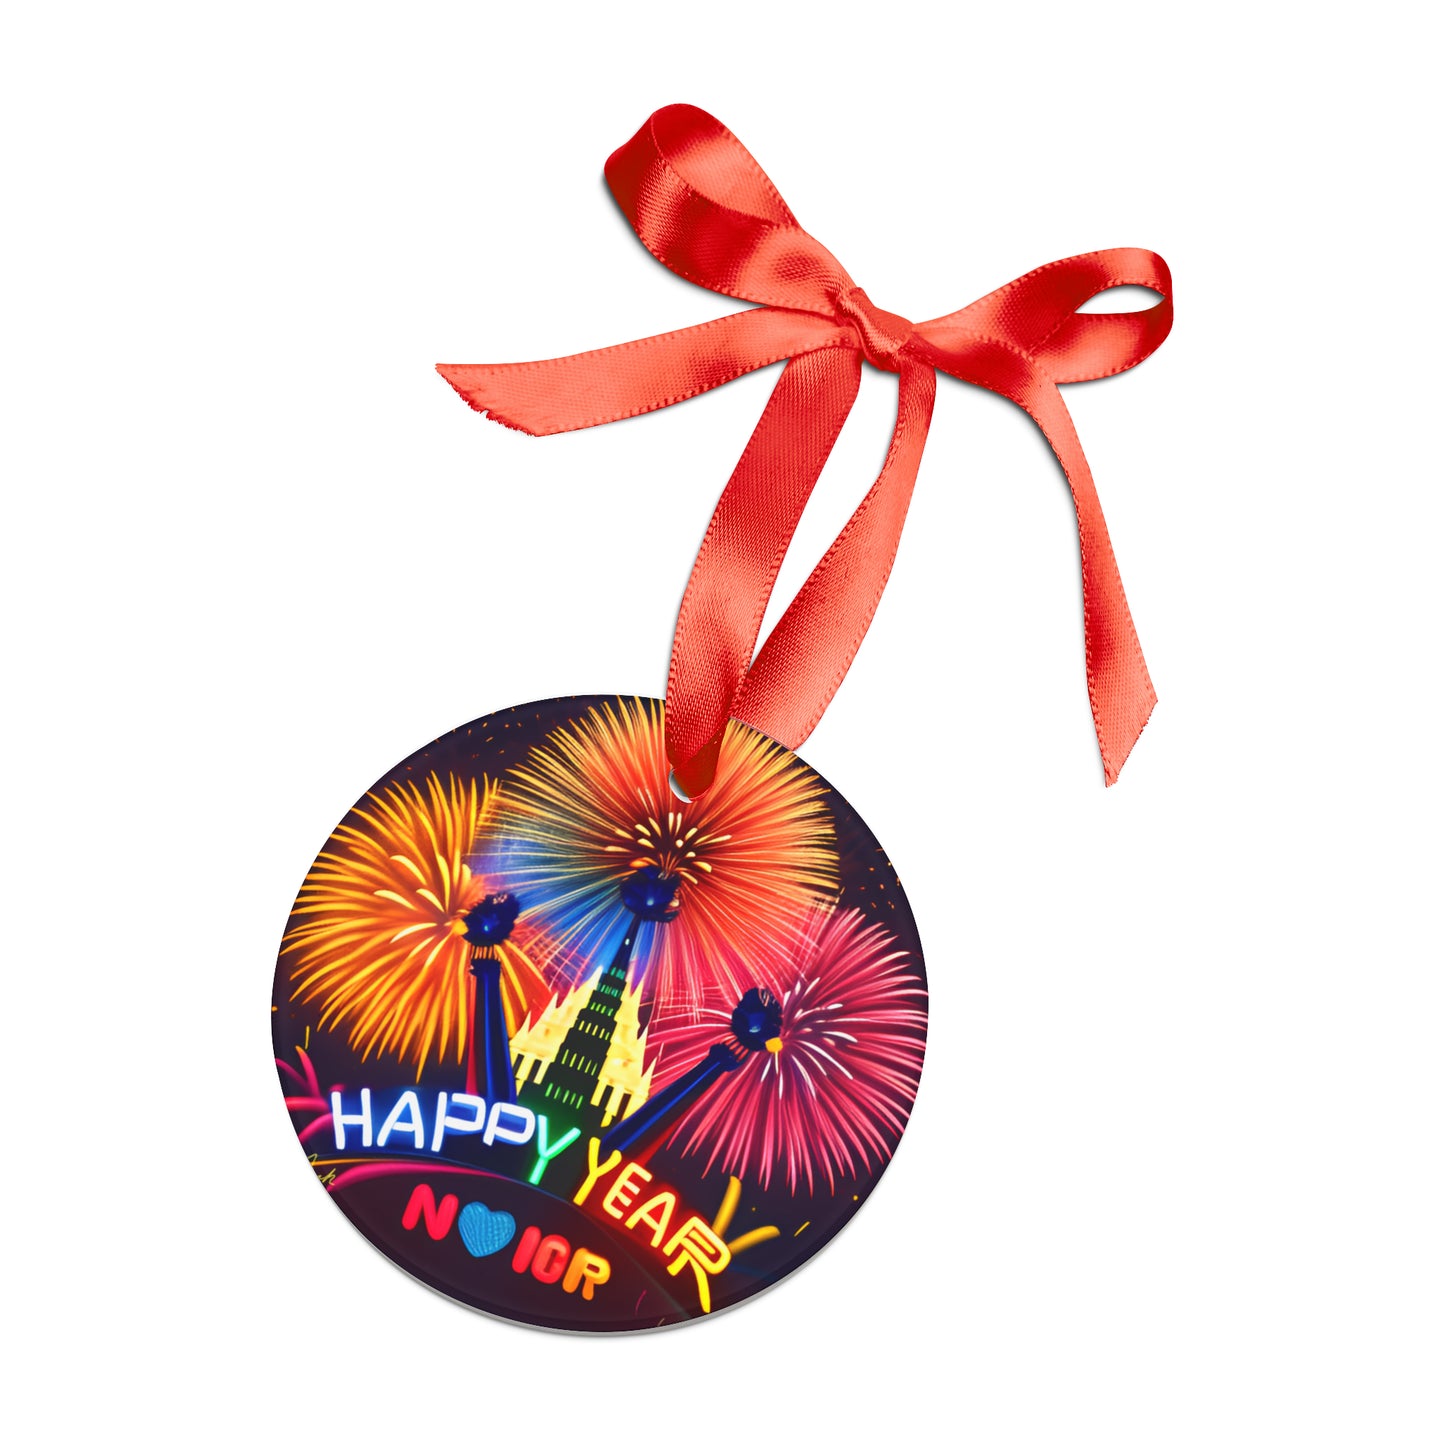 Happy New Year Design 2 Acrylic Ornament with Ribbon